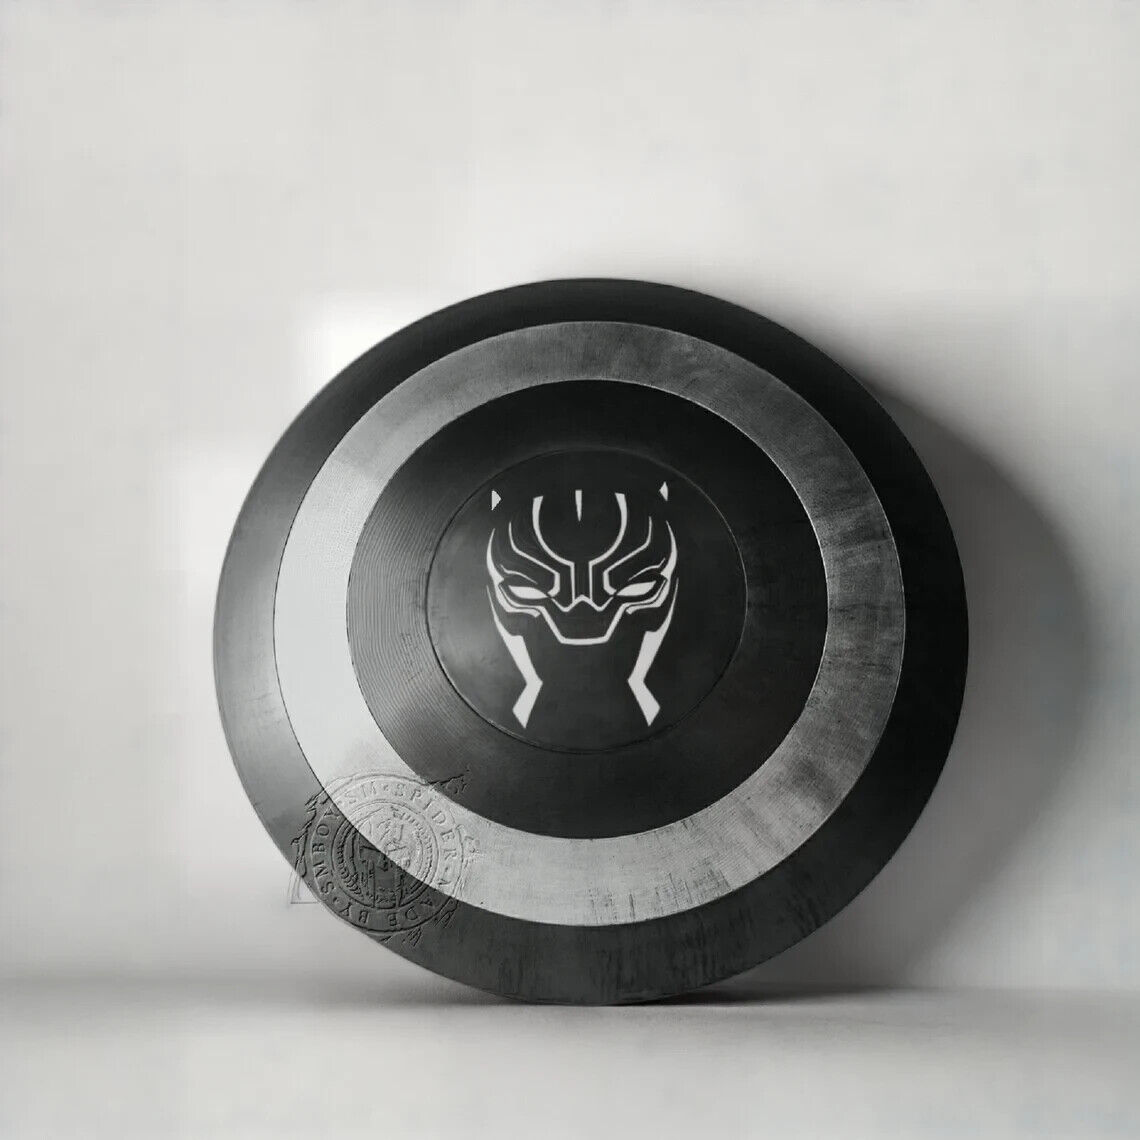 Black Panther Inspired Custom Design, Legend Captain America | Collectible Black